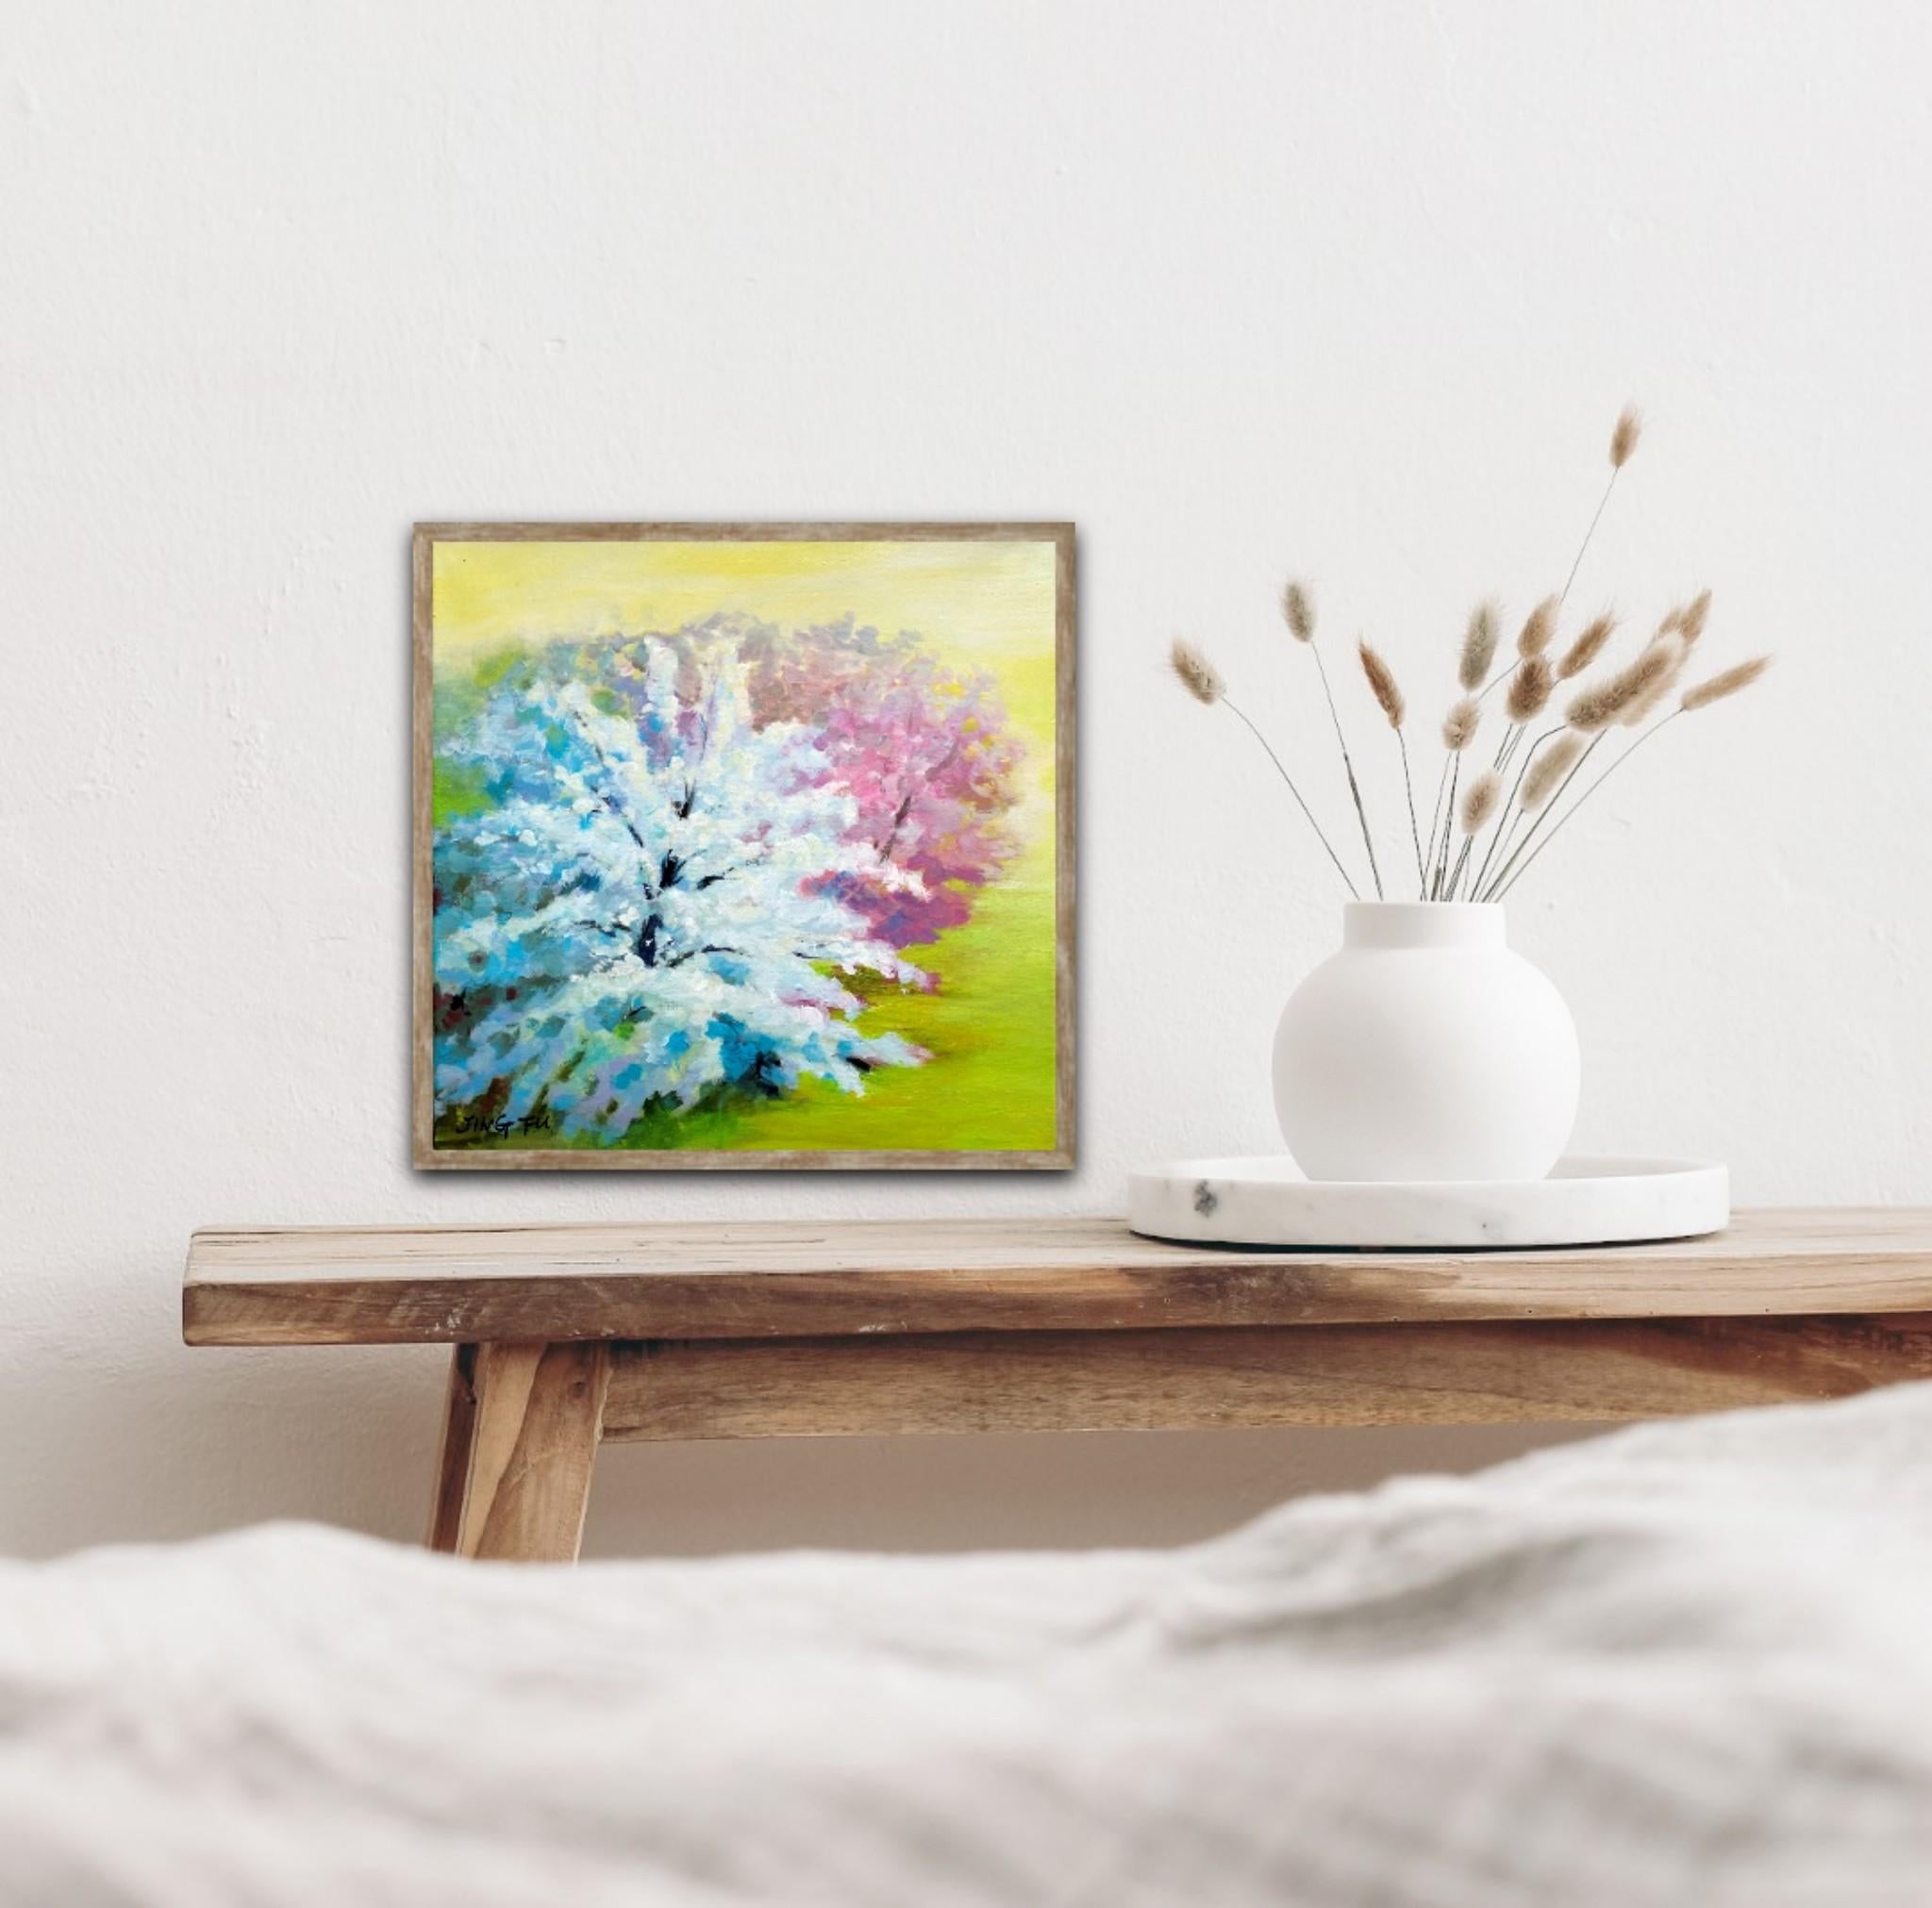 Spring Zest is a vibrant oil painting on canvas depicting pastel colored blossoming trees in a green field.
Comes framed and ready to hang.

